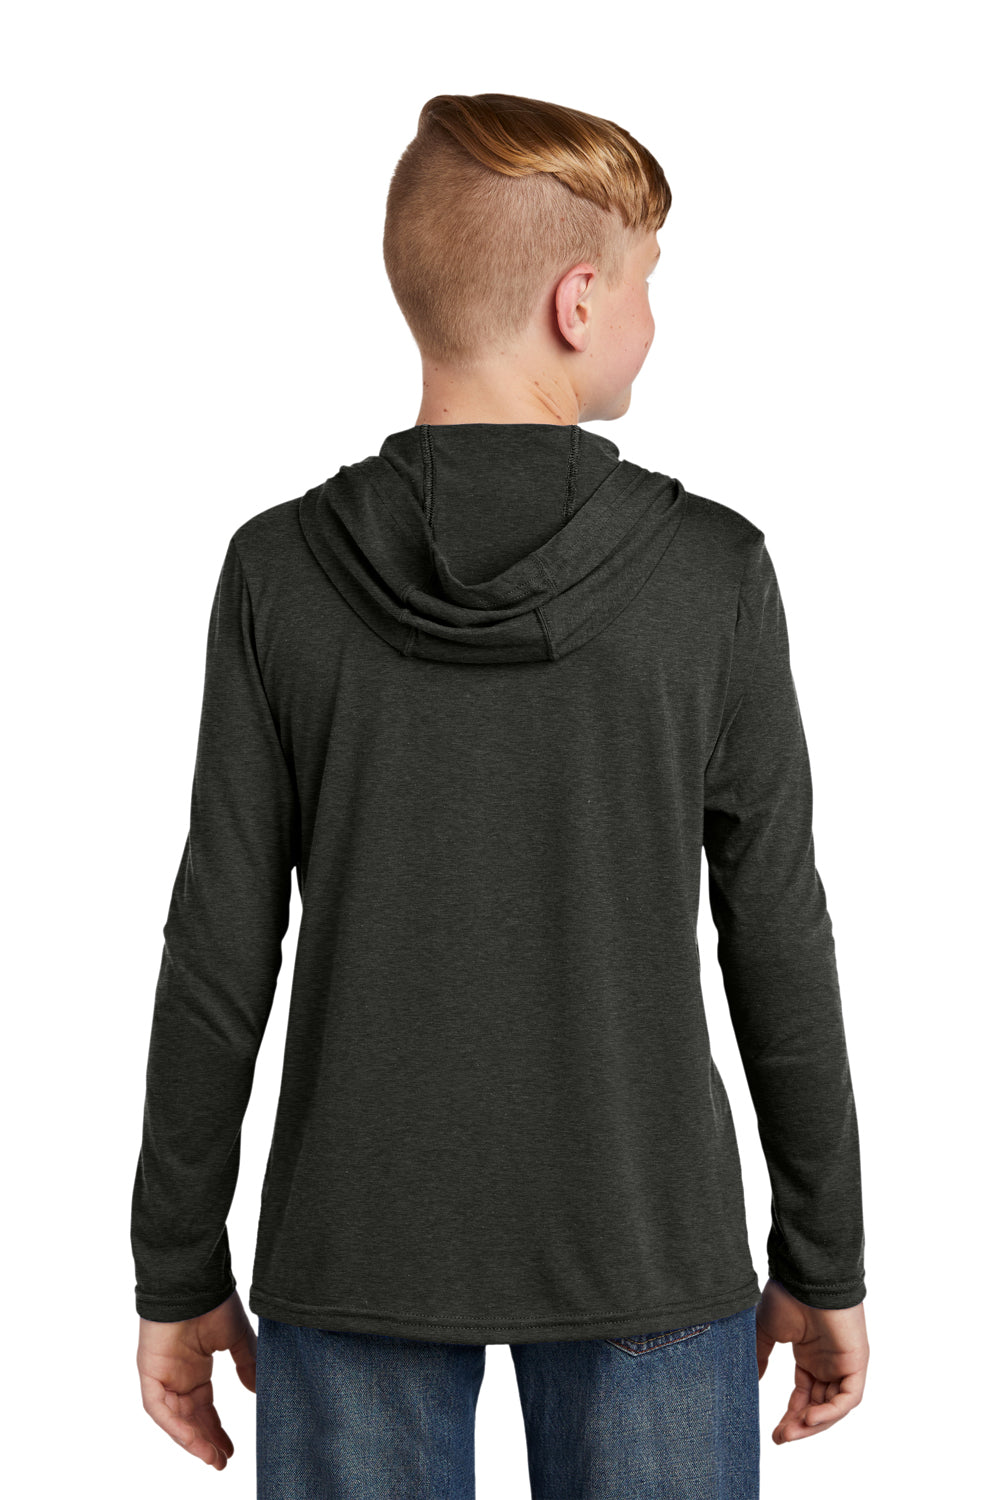 District DM139 Perfect Tri Long Sleeve Hoodie Charcoal XS